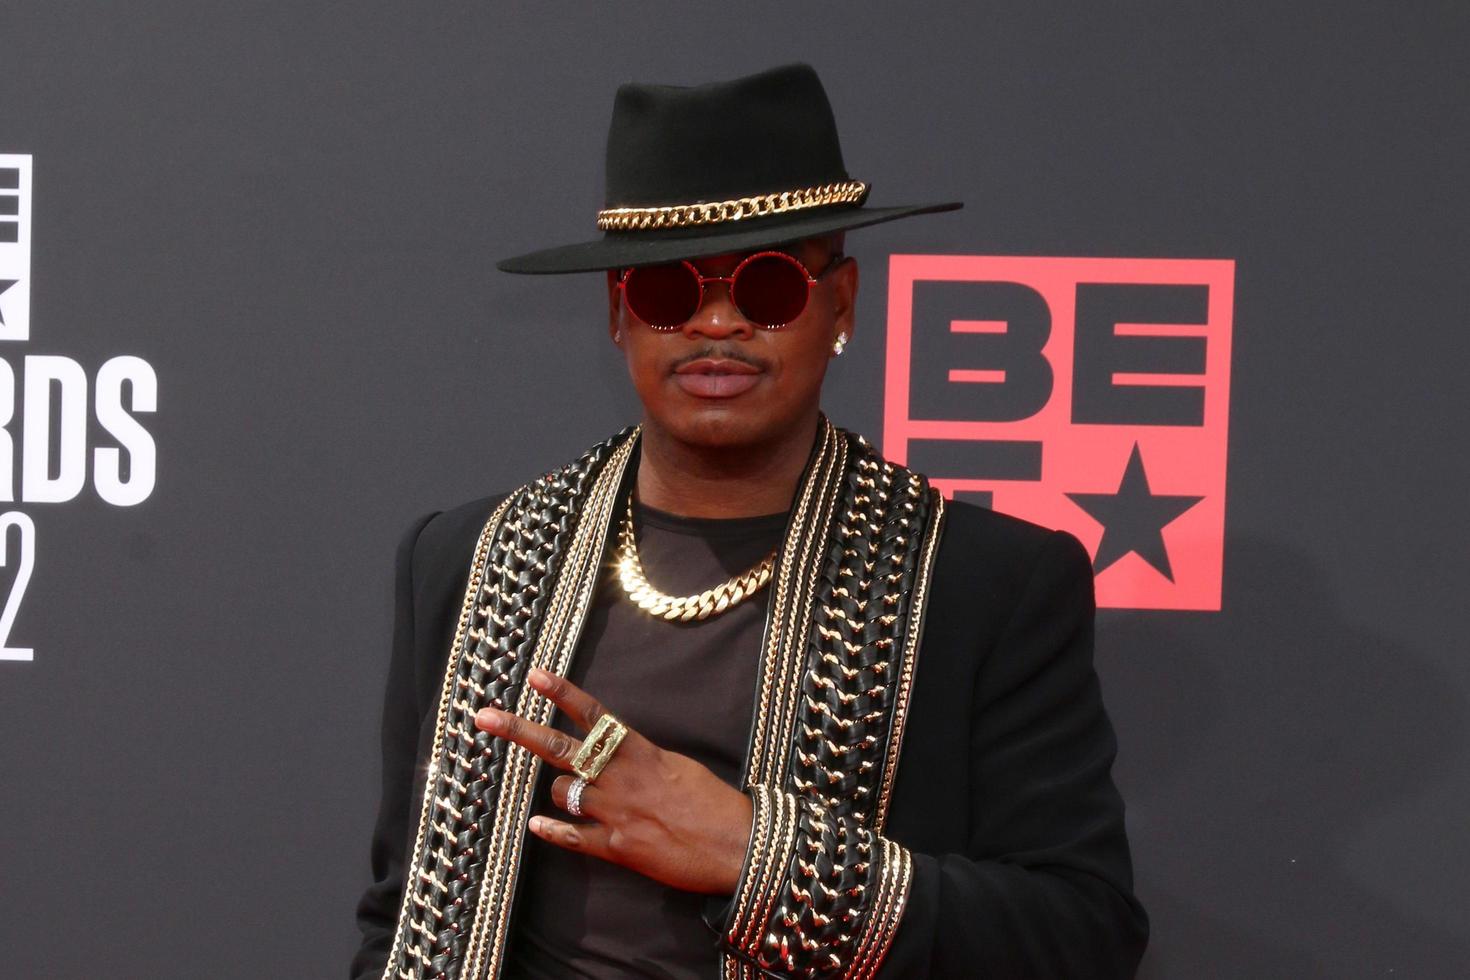 LOS ANGELES  JUN 26  NeYo at the 2022 BET Awards Arrivals at Microsoft Theater on June 26 2022 in Los Angeles CA photo